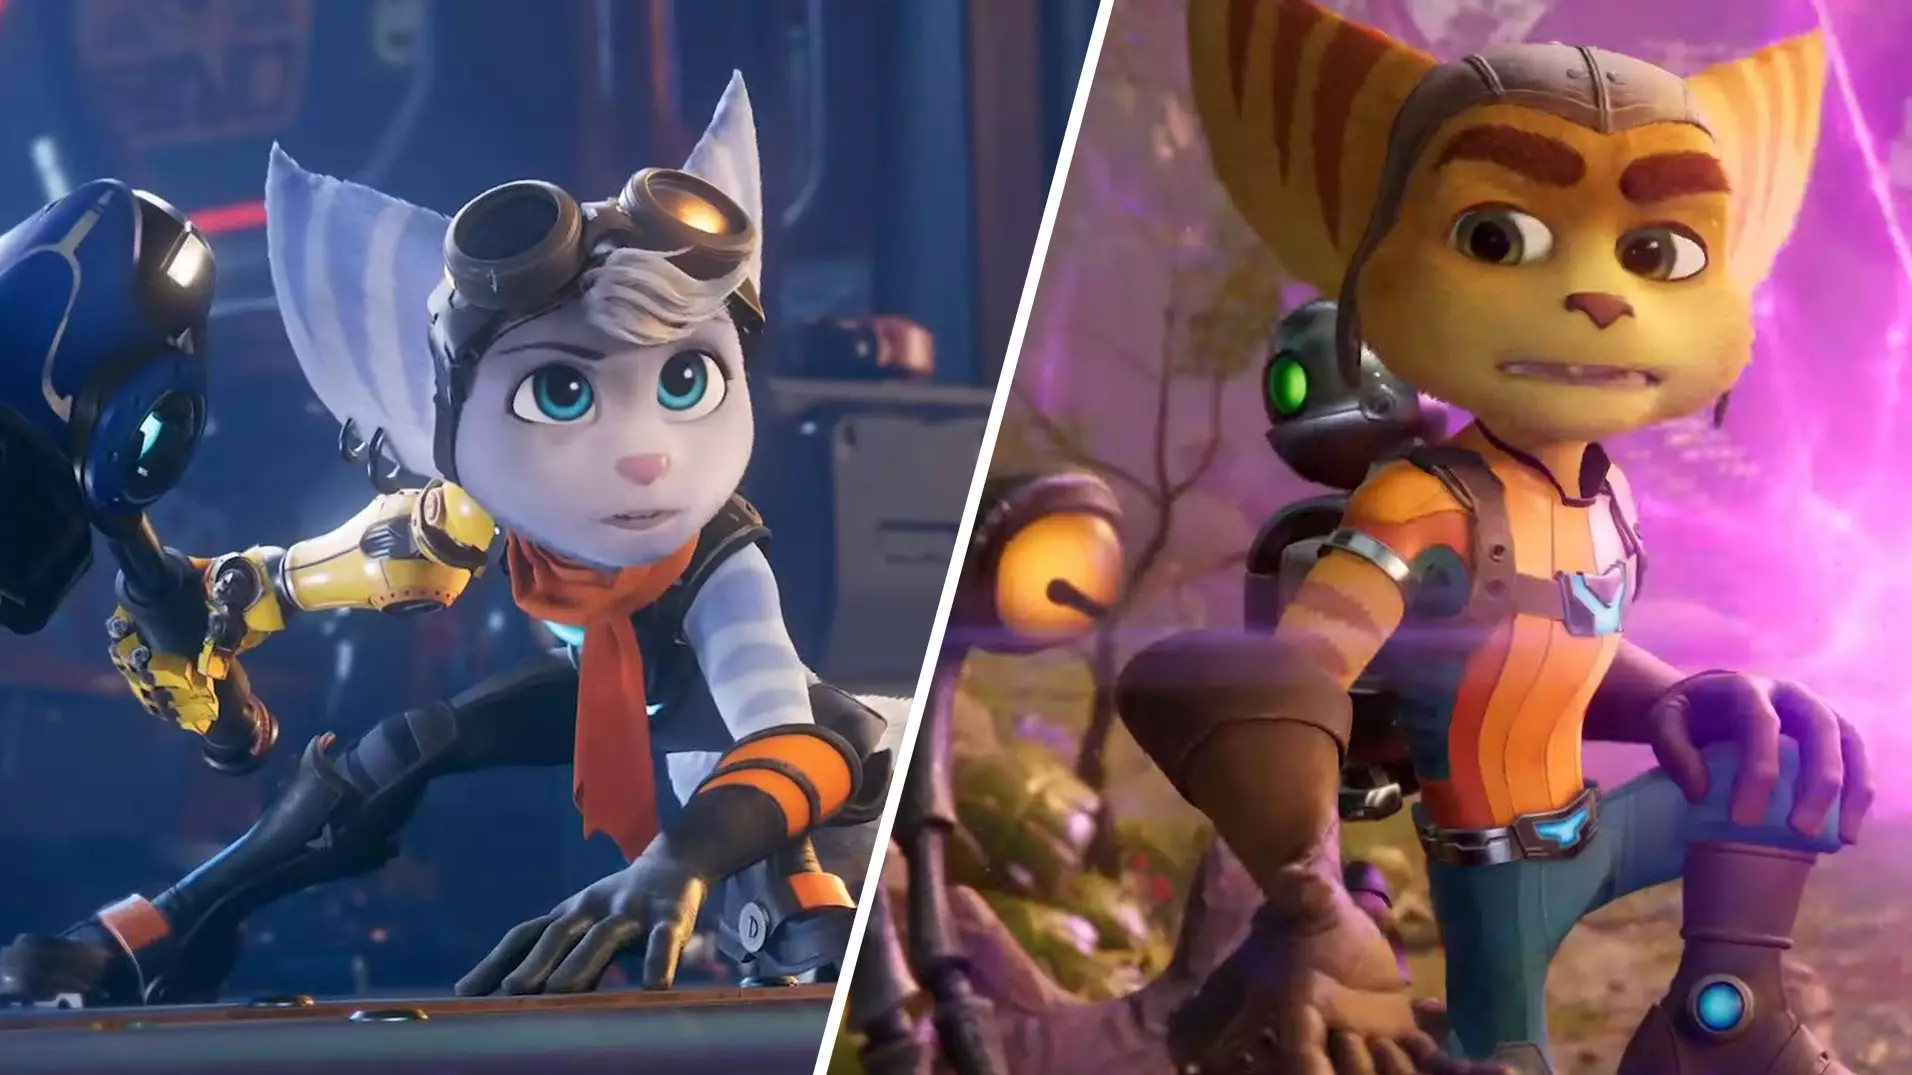 'Ratchet & Clank: Rift Apart' Announced For PlayStation 5 